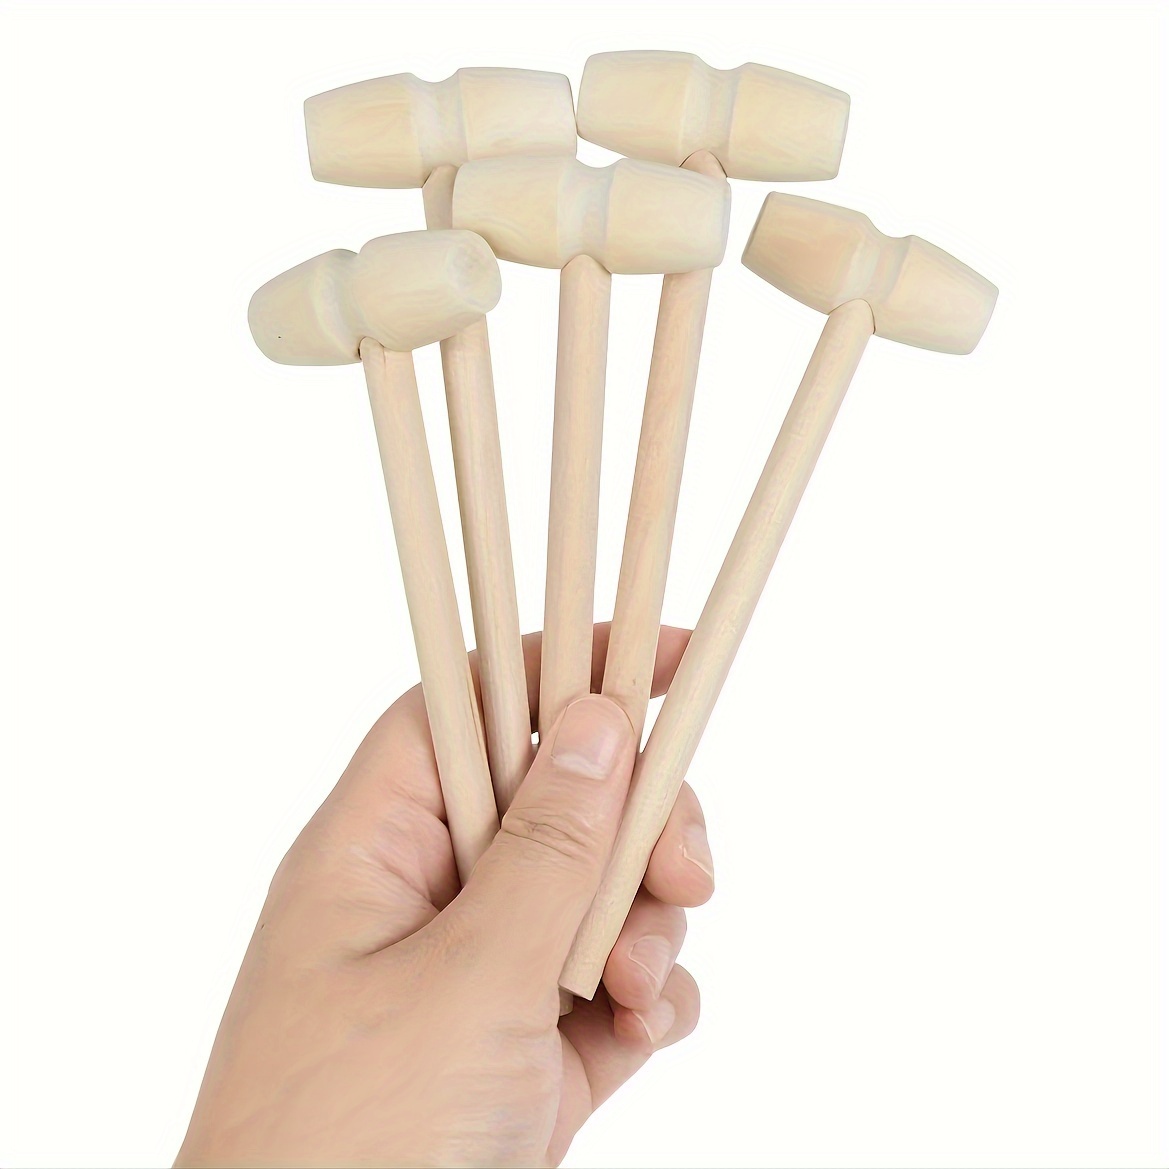 4 Pcs Wooden Crab Lobster Mallets Seafood Hammers, Solid Natural